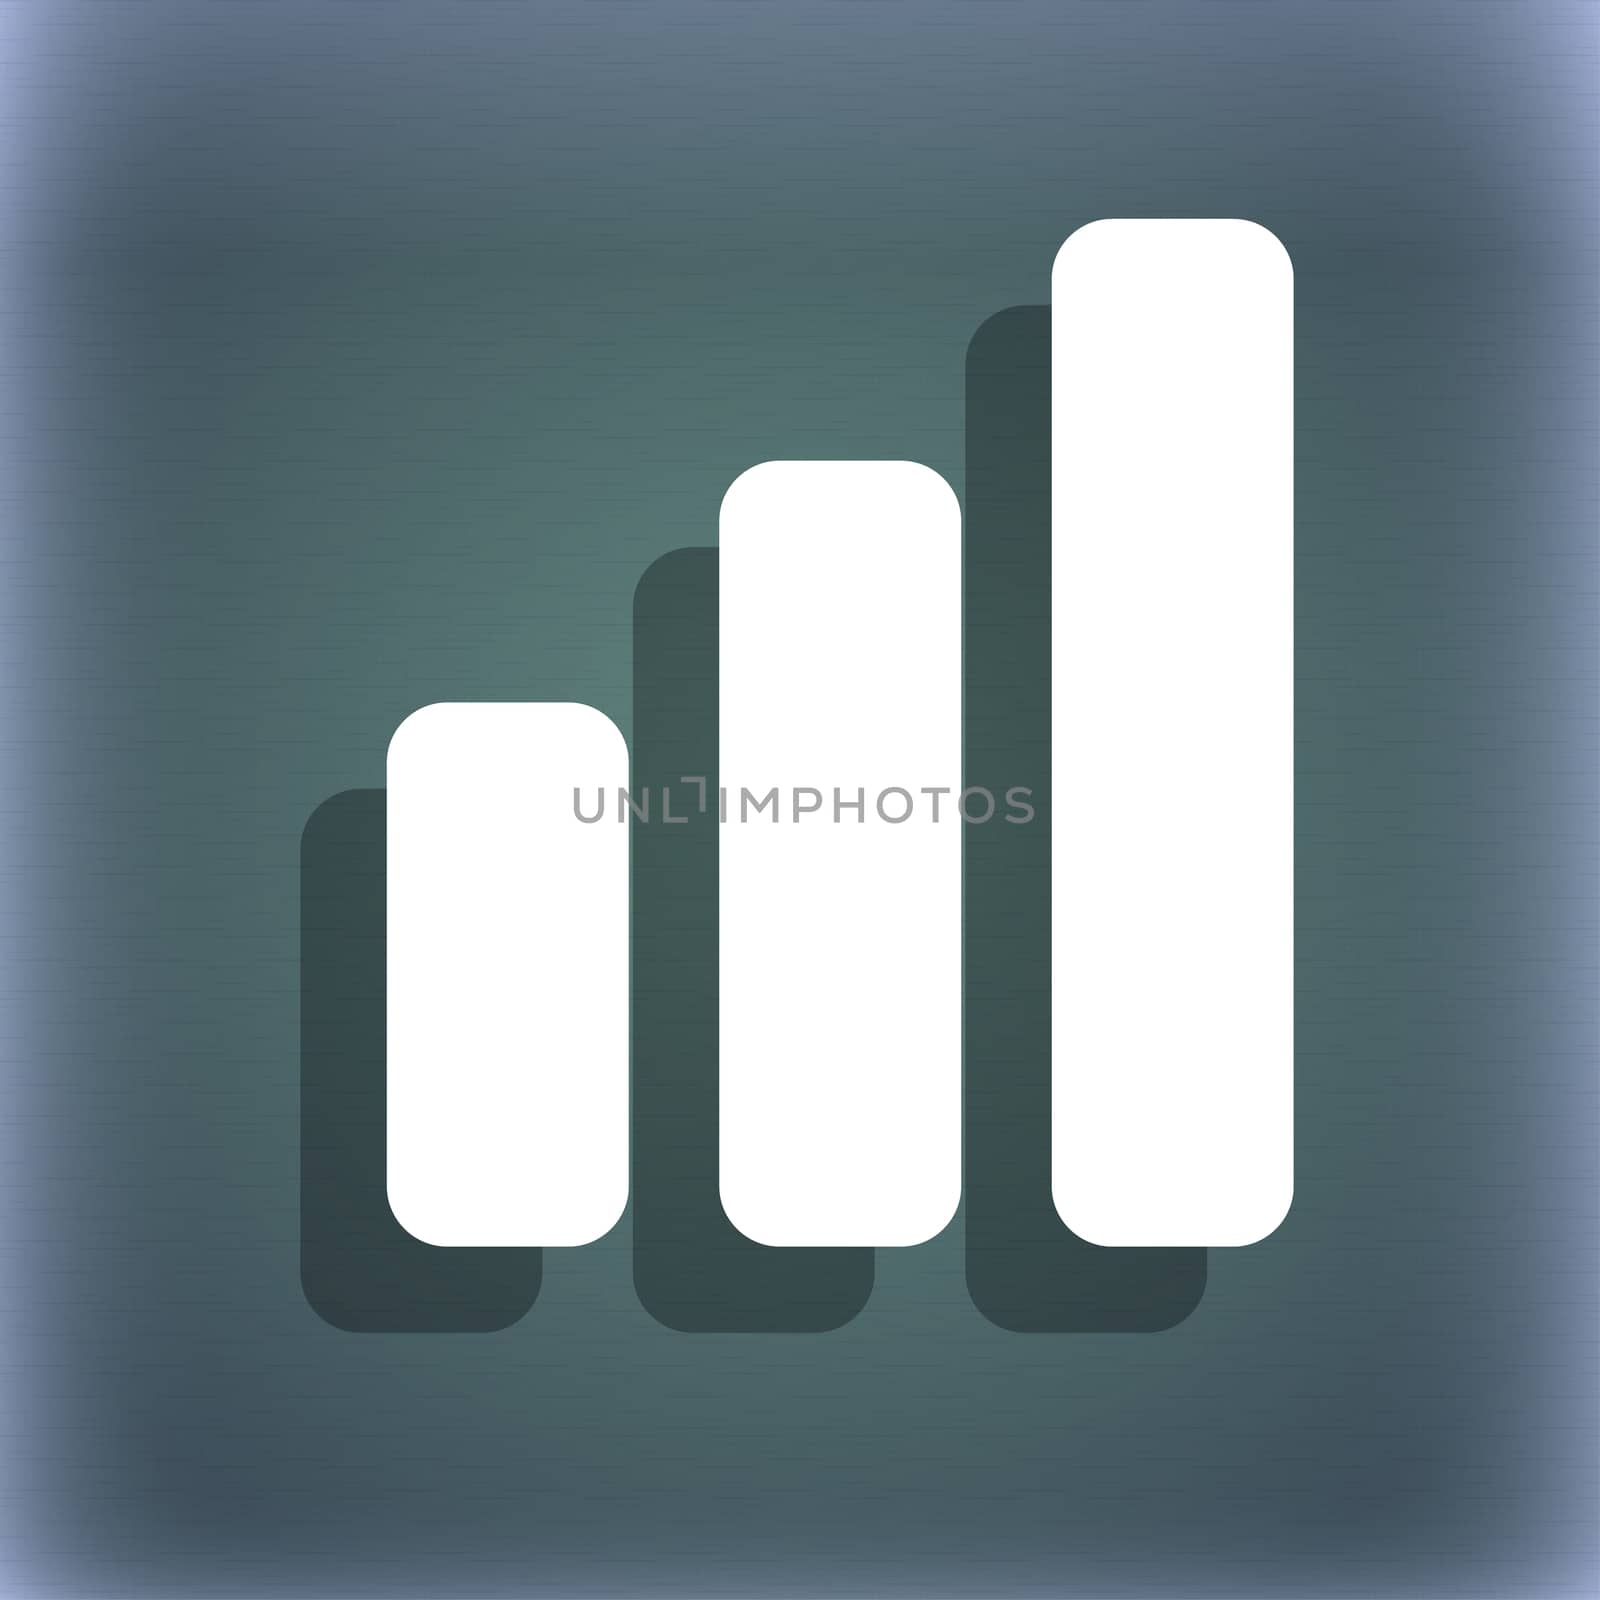 Growth and development concept. graph of Rate icon symbol on the blue-green abstract background with shadow and space for your text. illustration